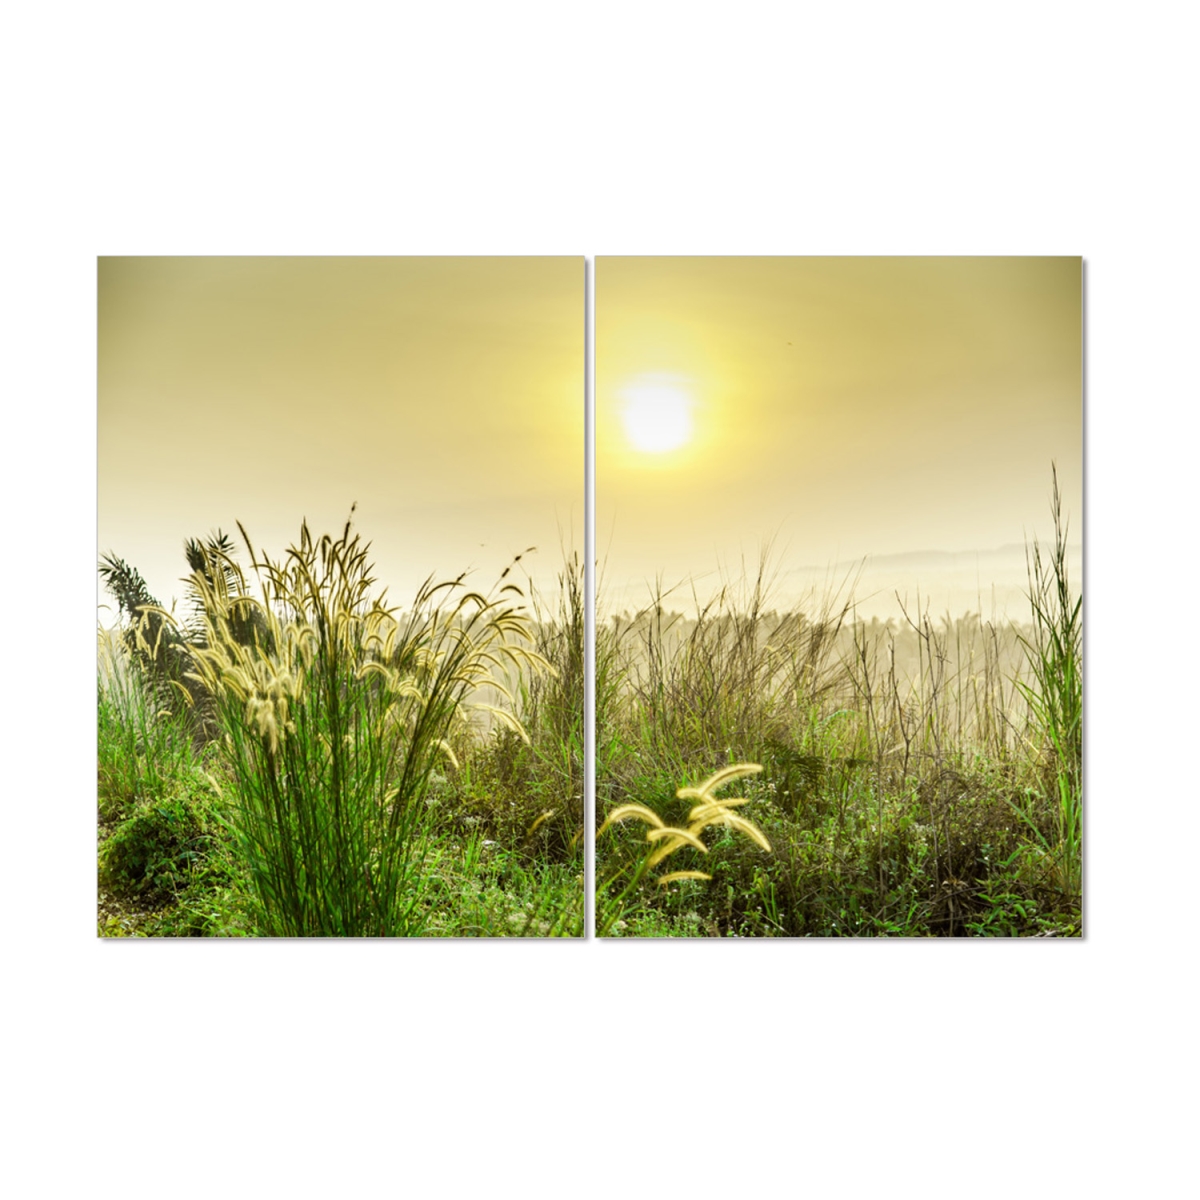 F3abms70 40 X 27.5 In. Seni Morning Scenery 2-panel Mdf Framed Photography Triptych Print